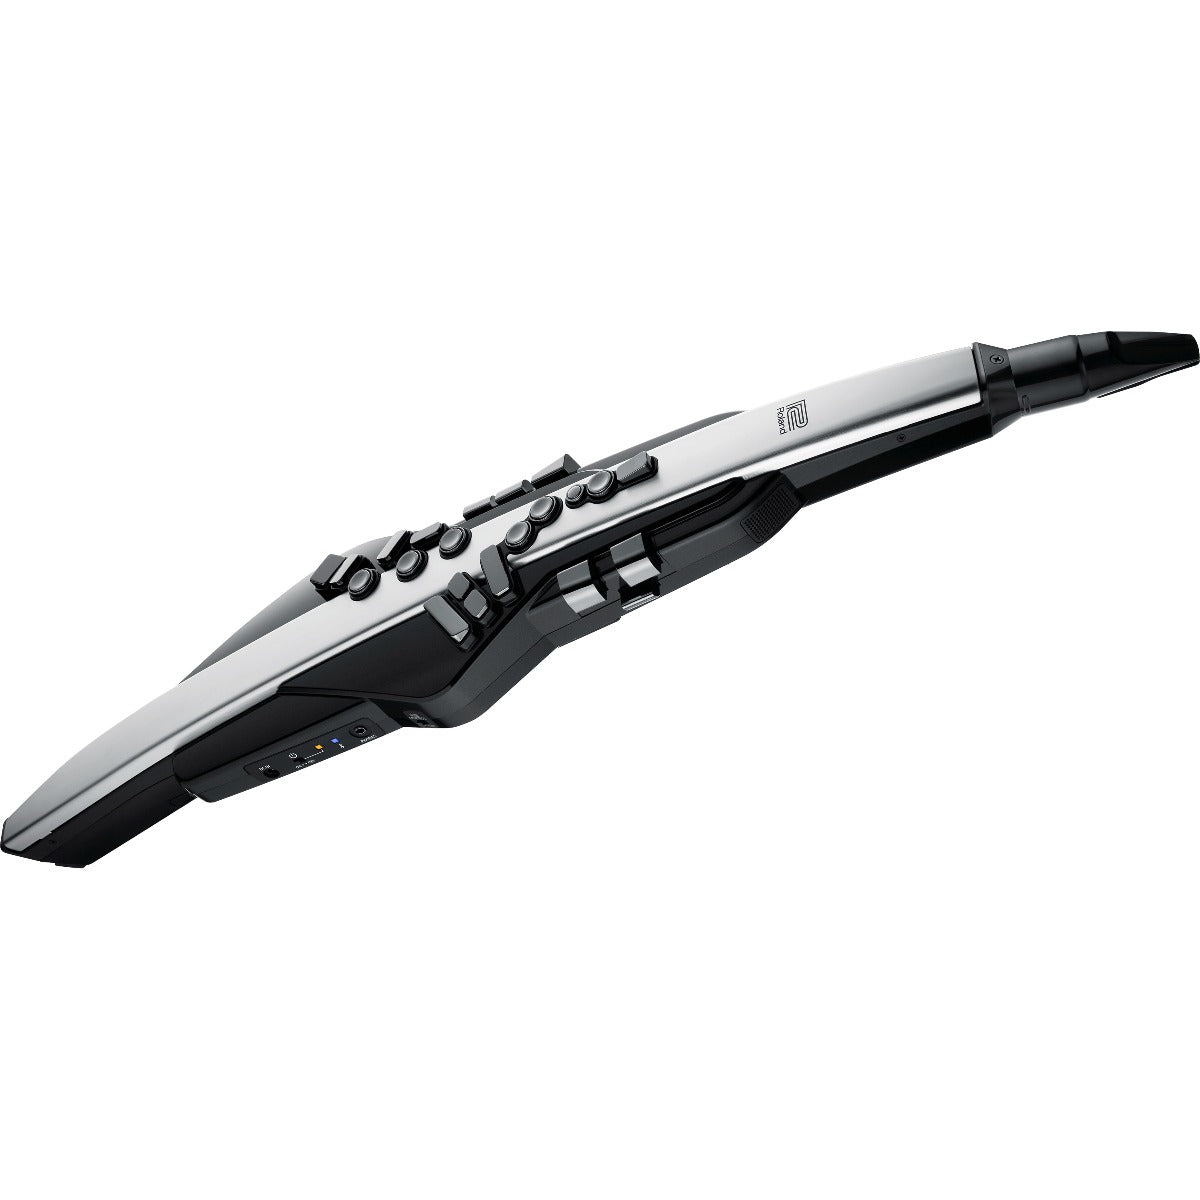 Perspective view of Roland Aerophone Pro AE-30 Digital Wind Instrument showing front and left side